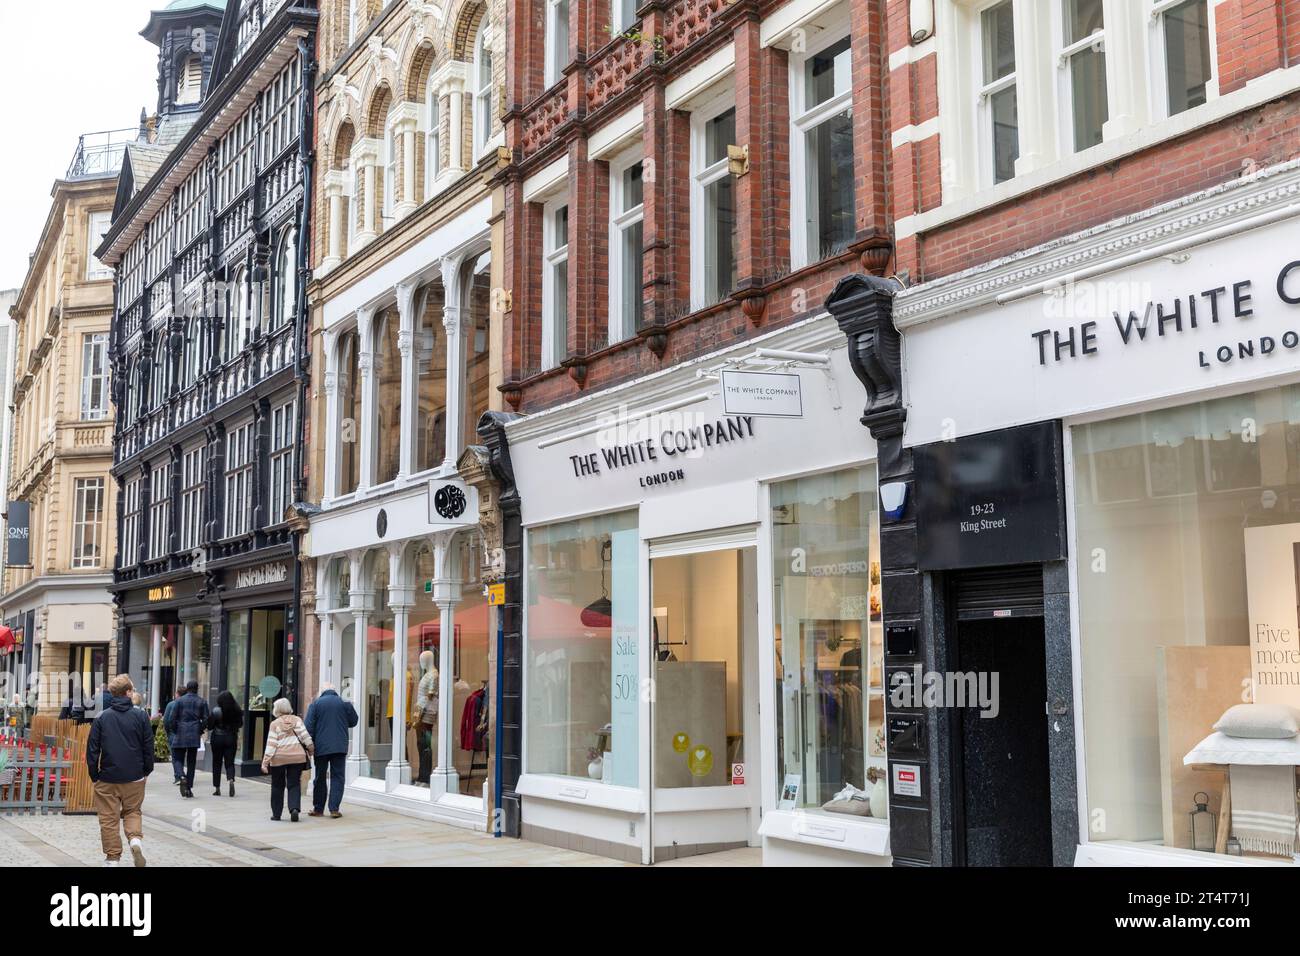 The White Company London retail store in King street Manchester selling range of homewares, furniture and clothing,England,UK,2023 Stock Photo